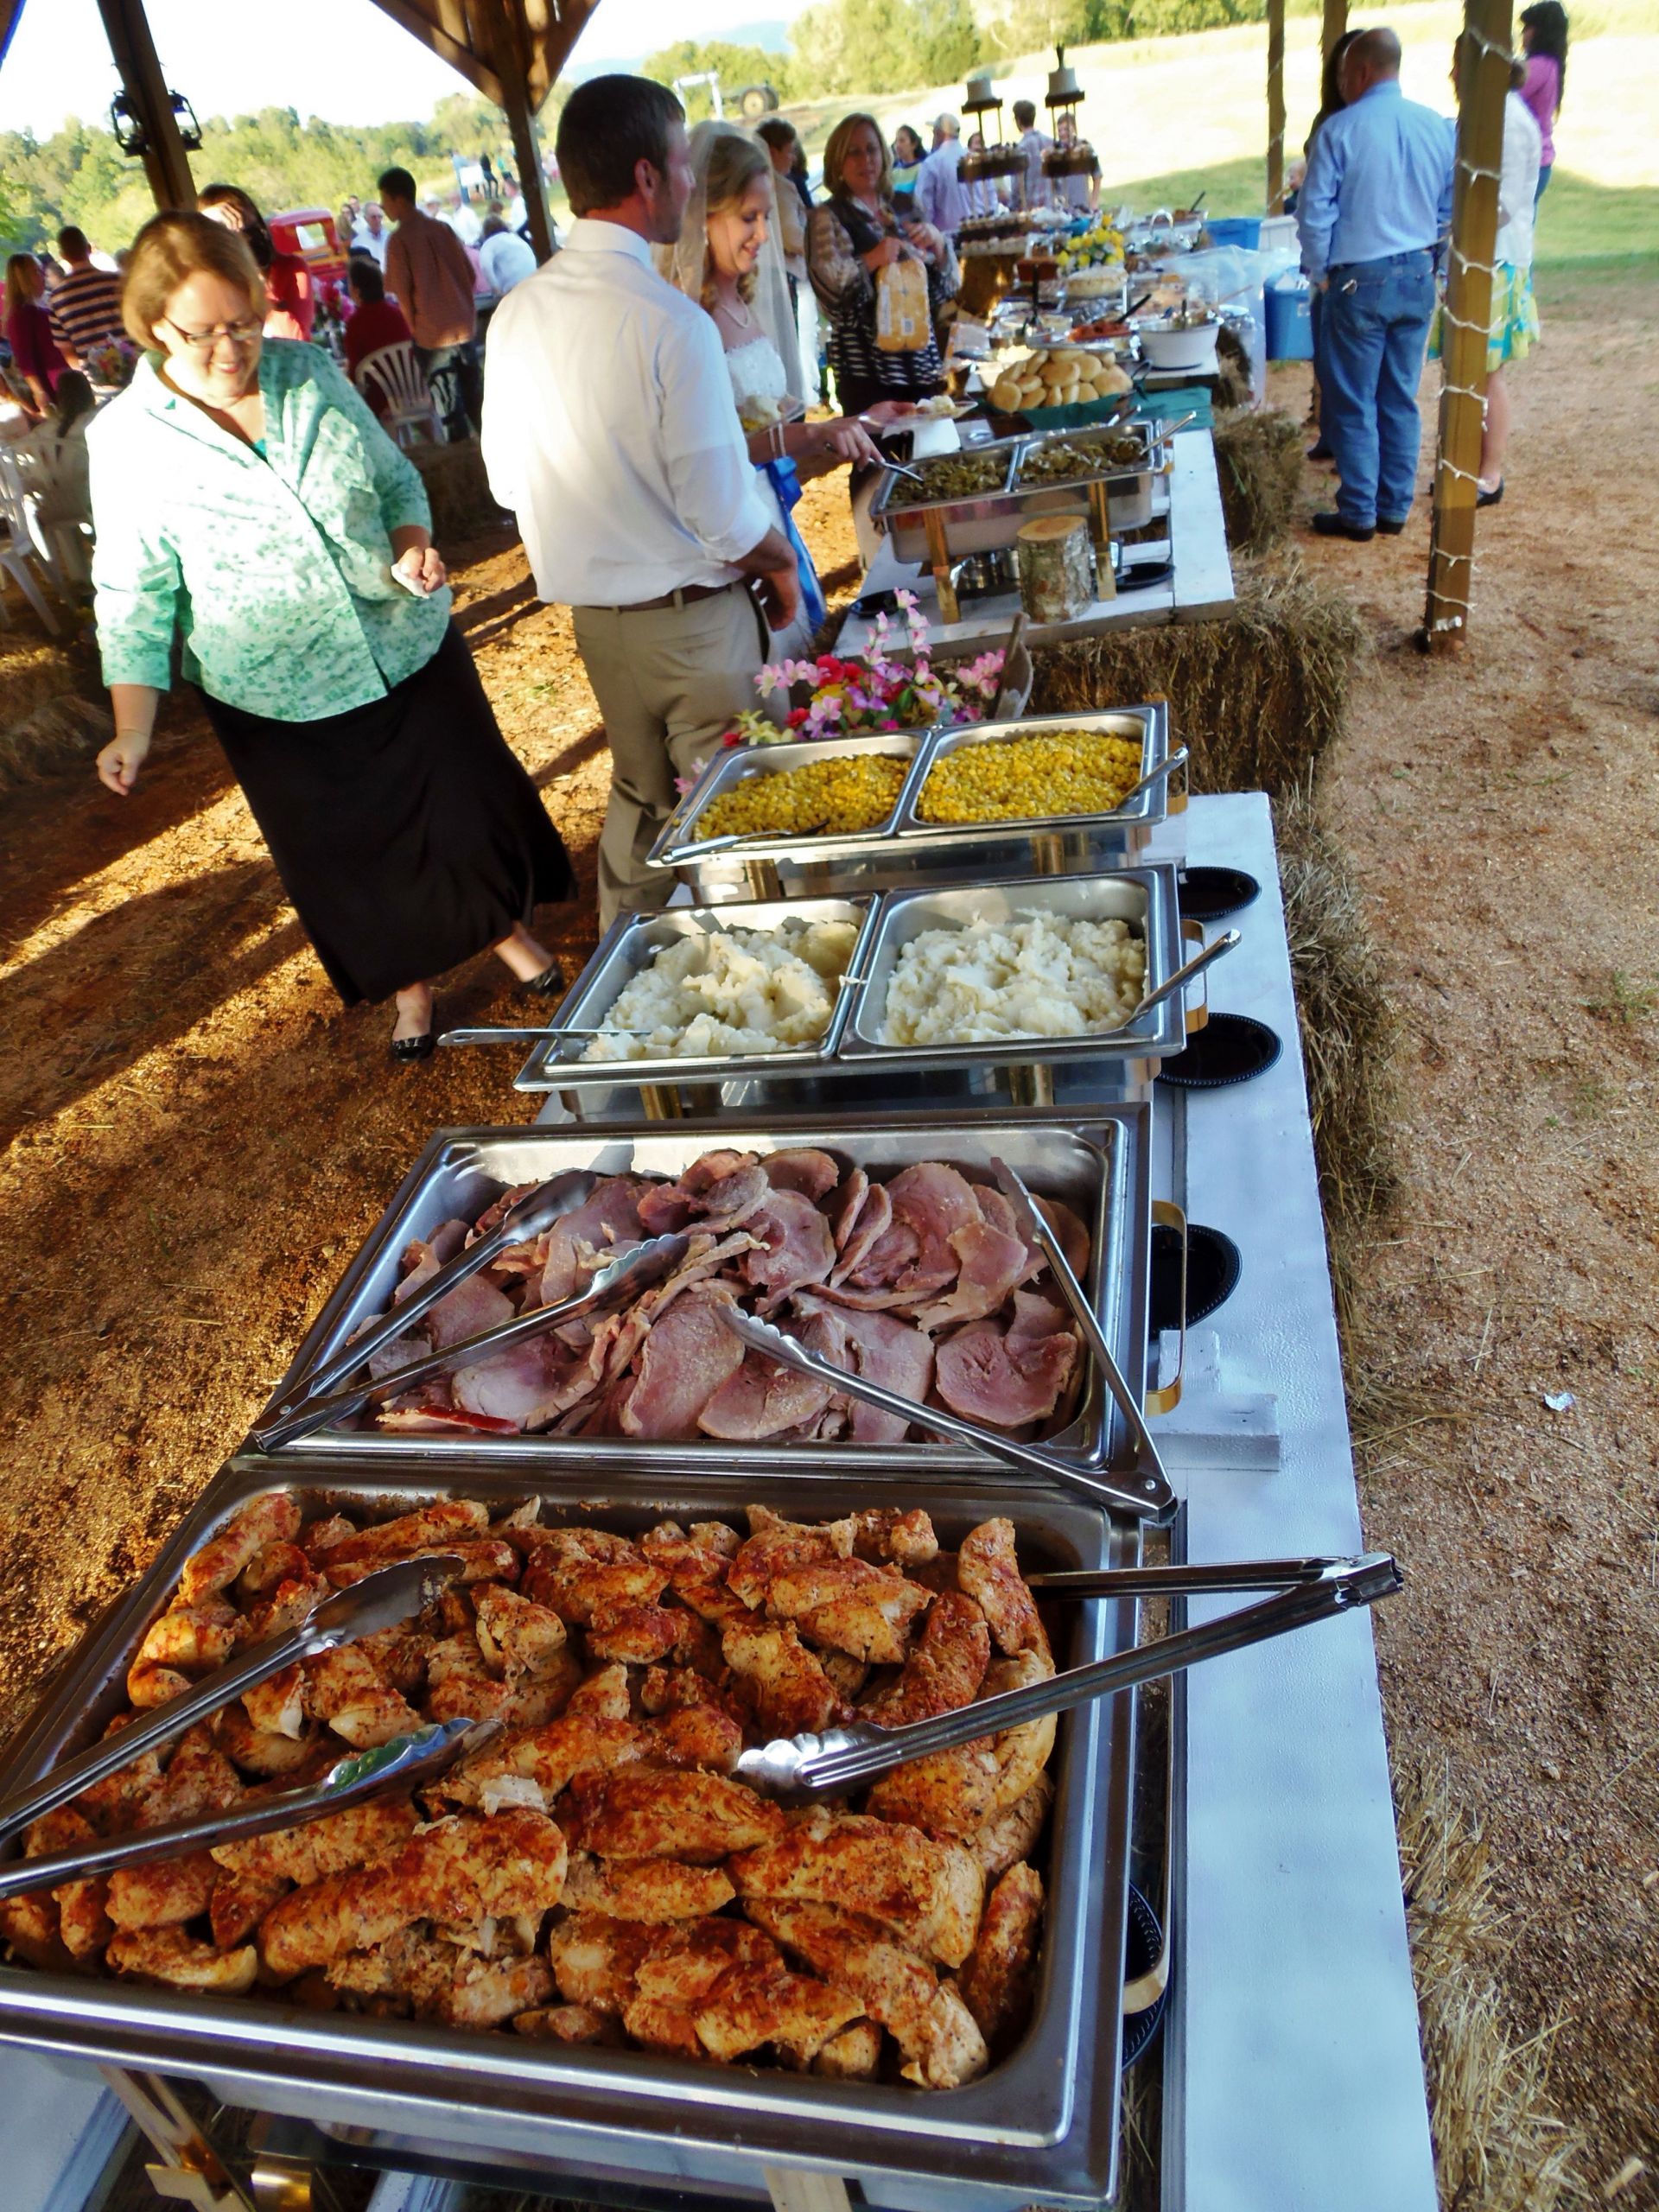 Engagement Party Food Ideas Casual
 Buffet for outdoor country wedding chicken ham mashed